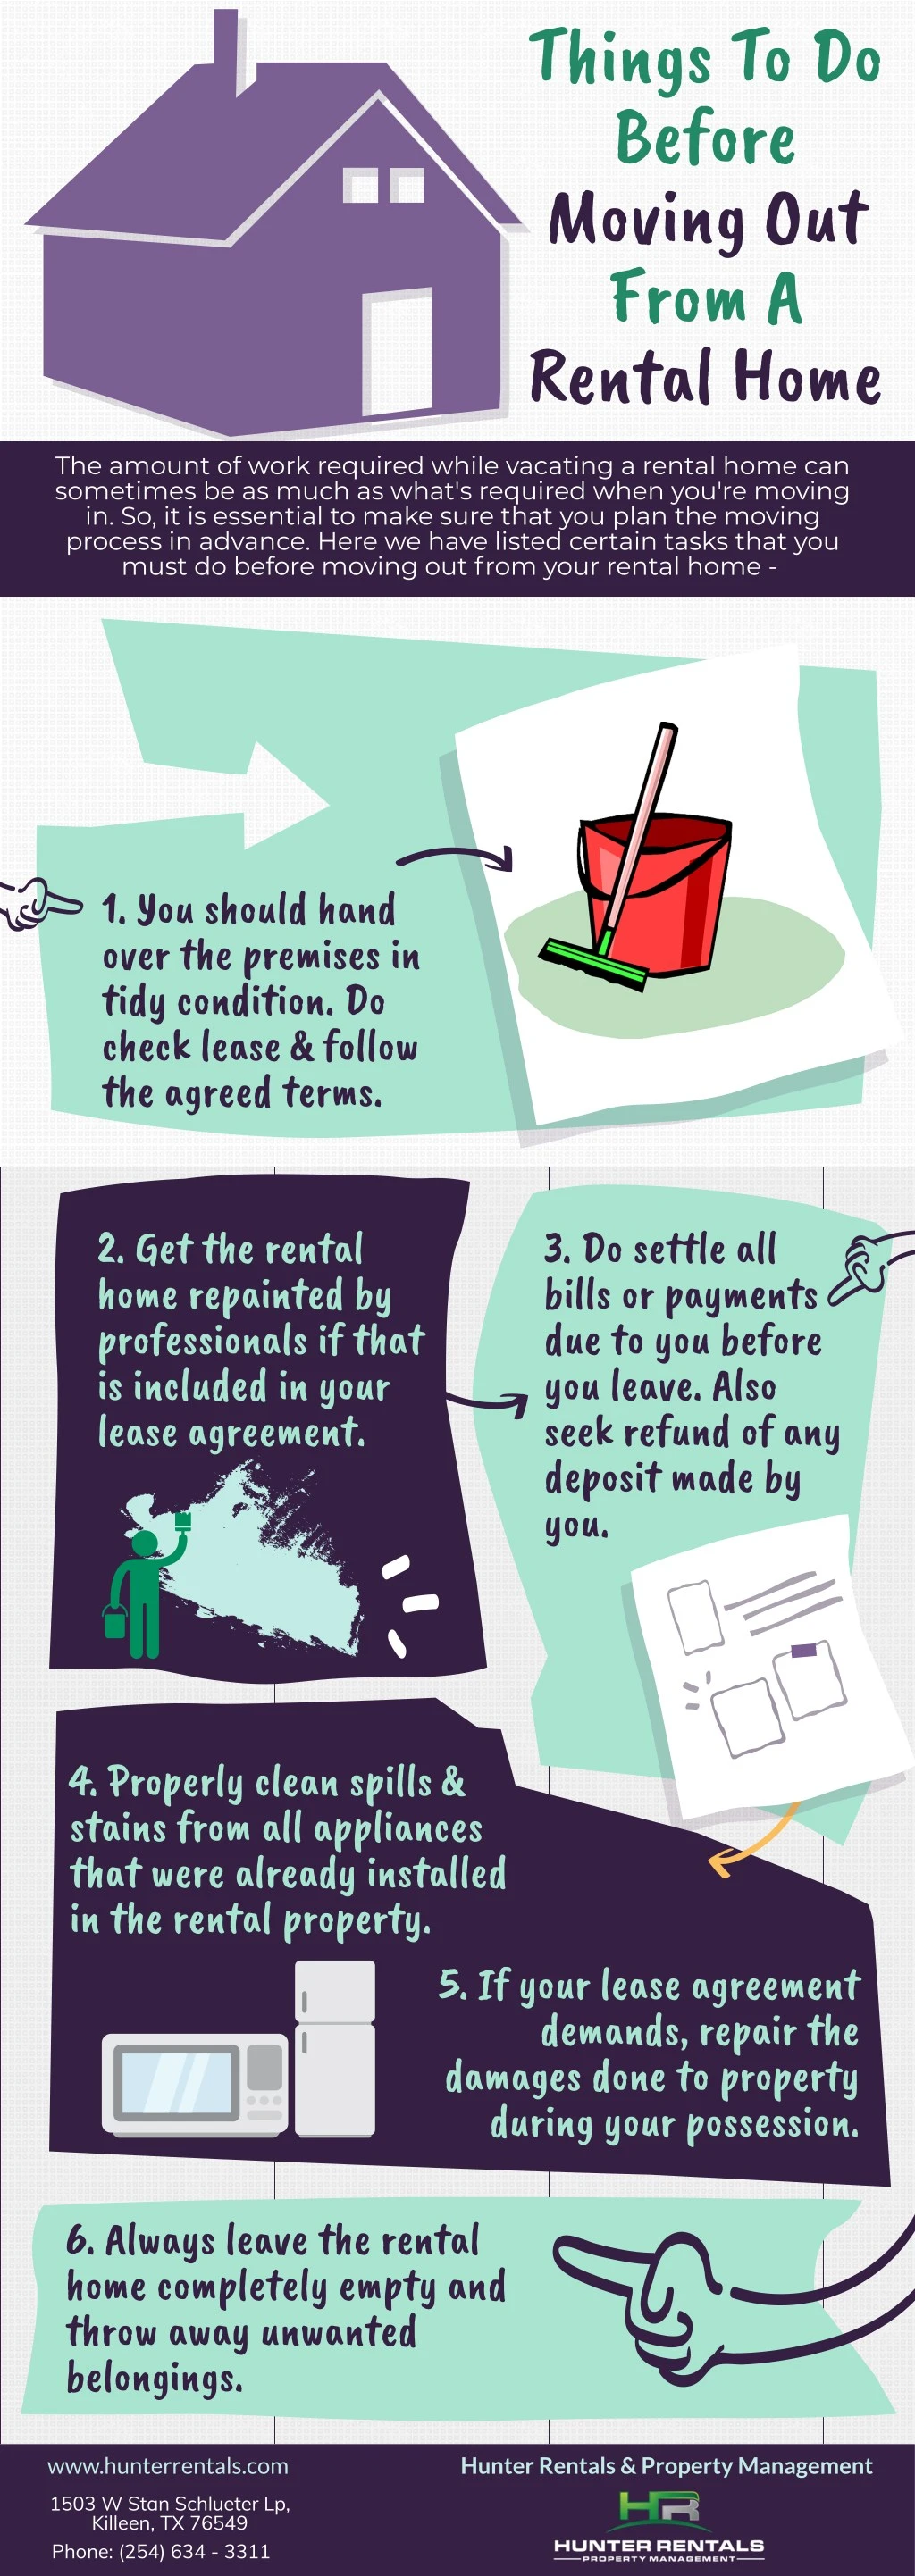 things to do before moving out from a rental home